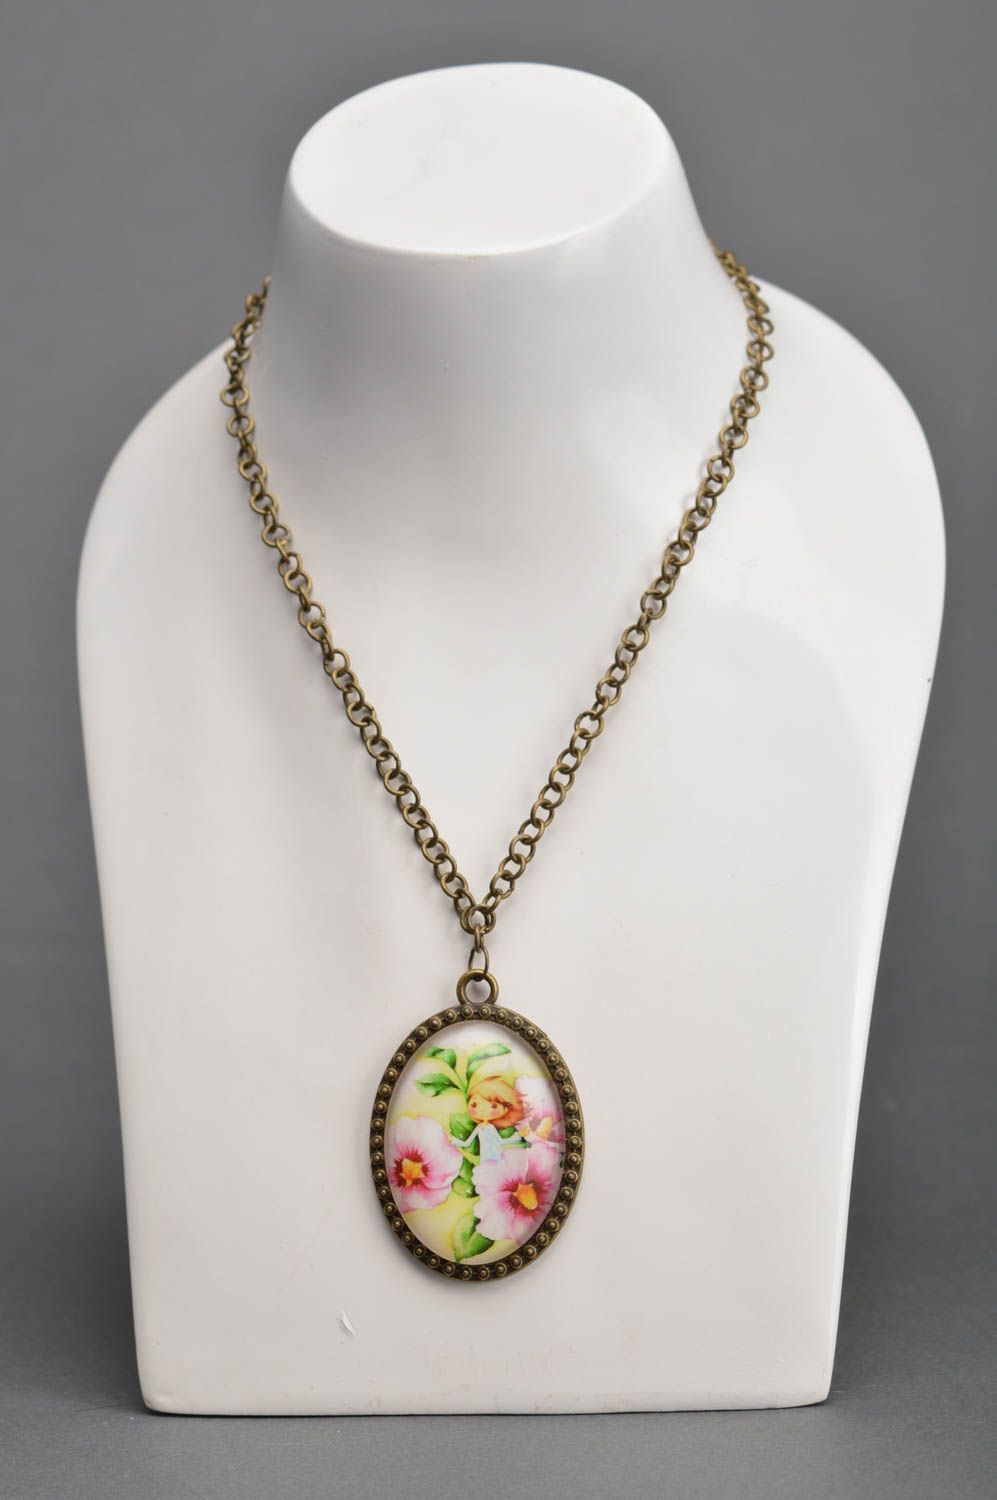 Handmade designer oval pendant on chain in vintage style with flowers  photo 1